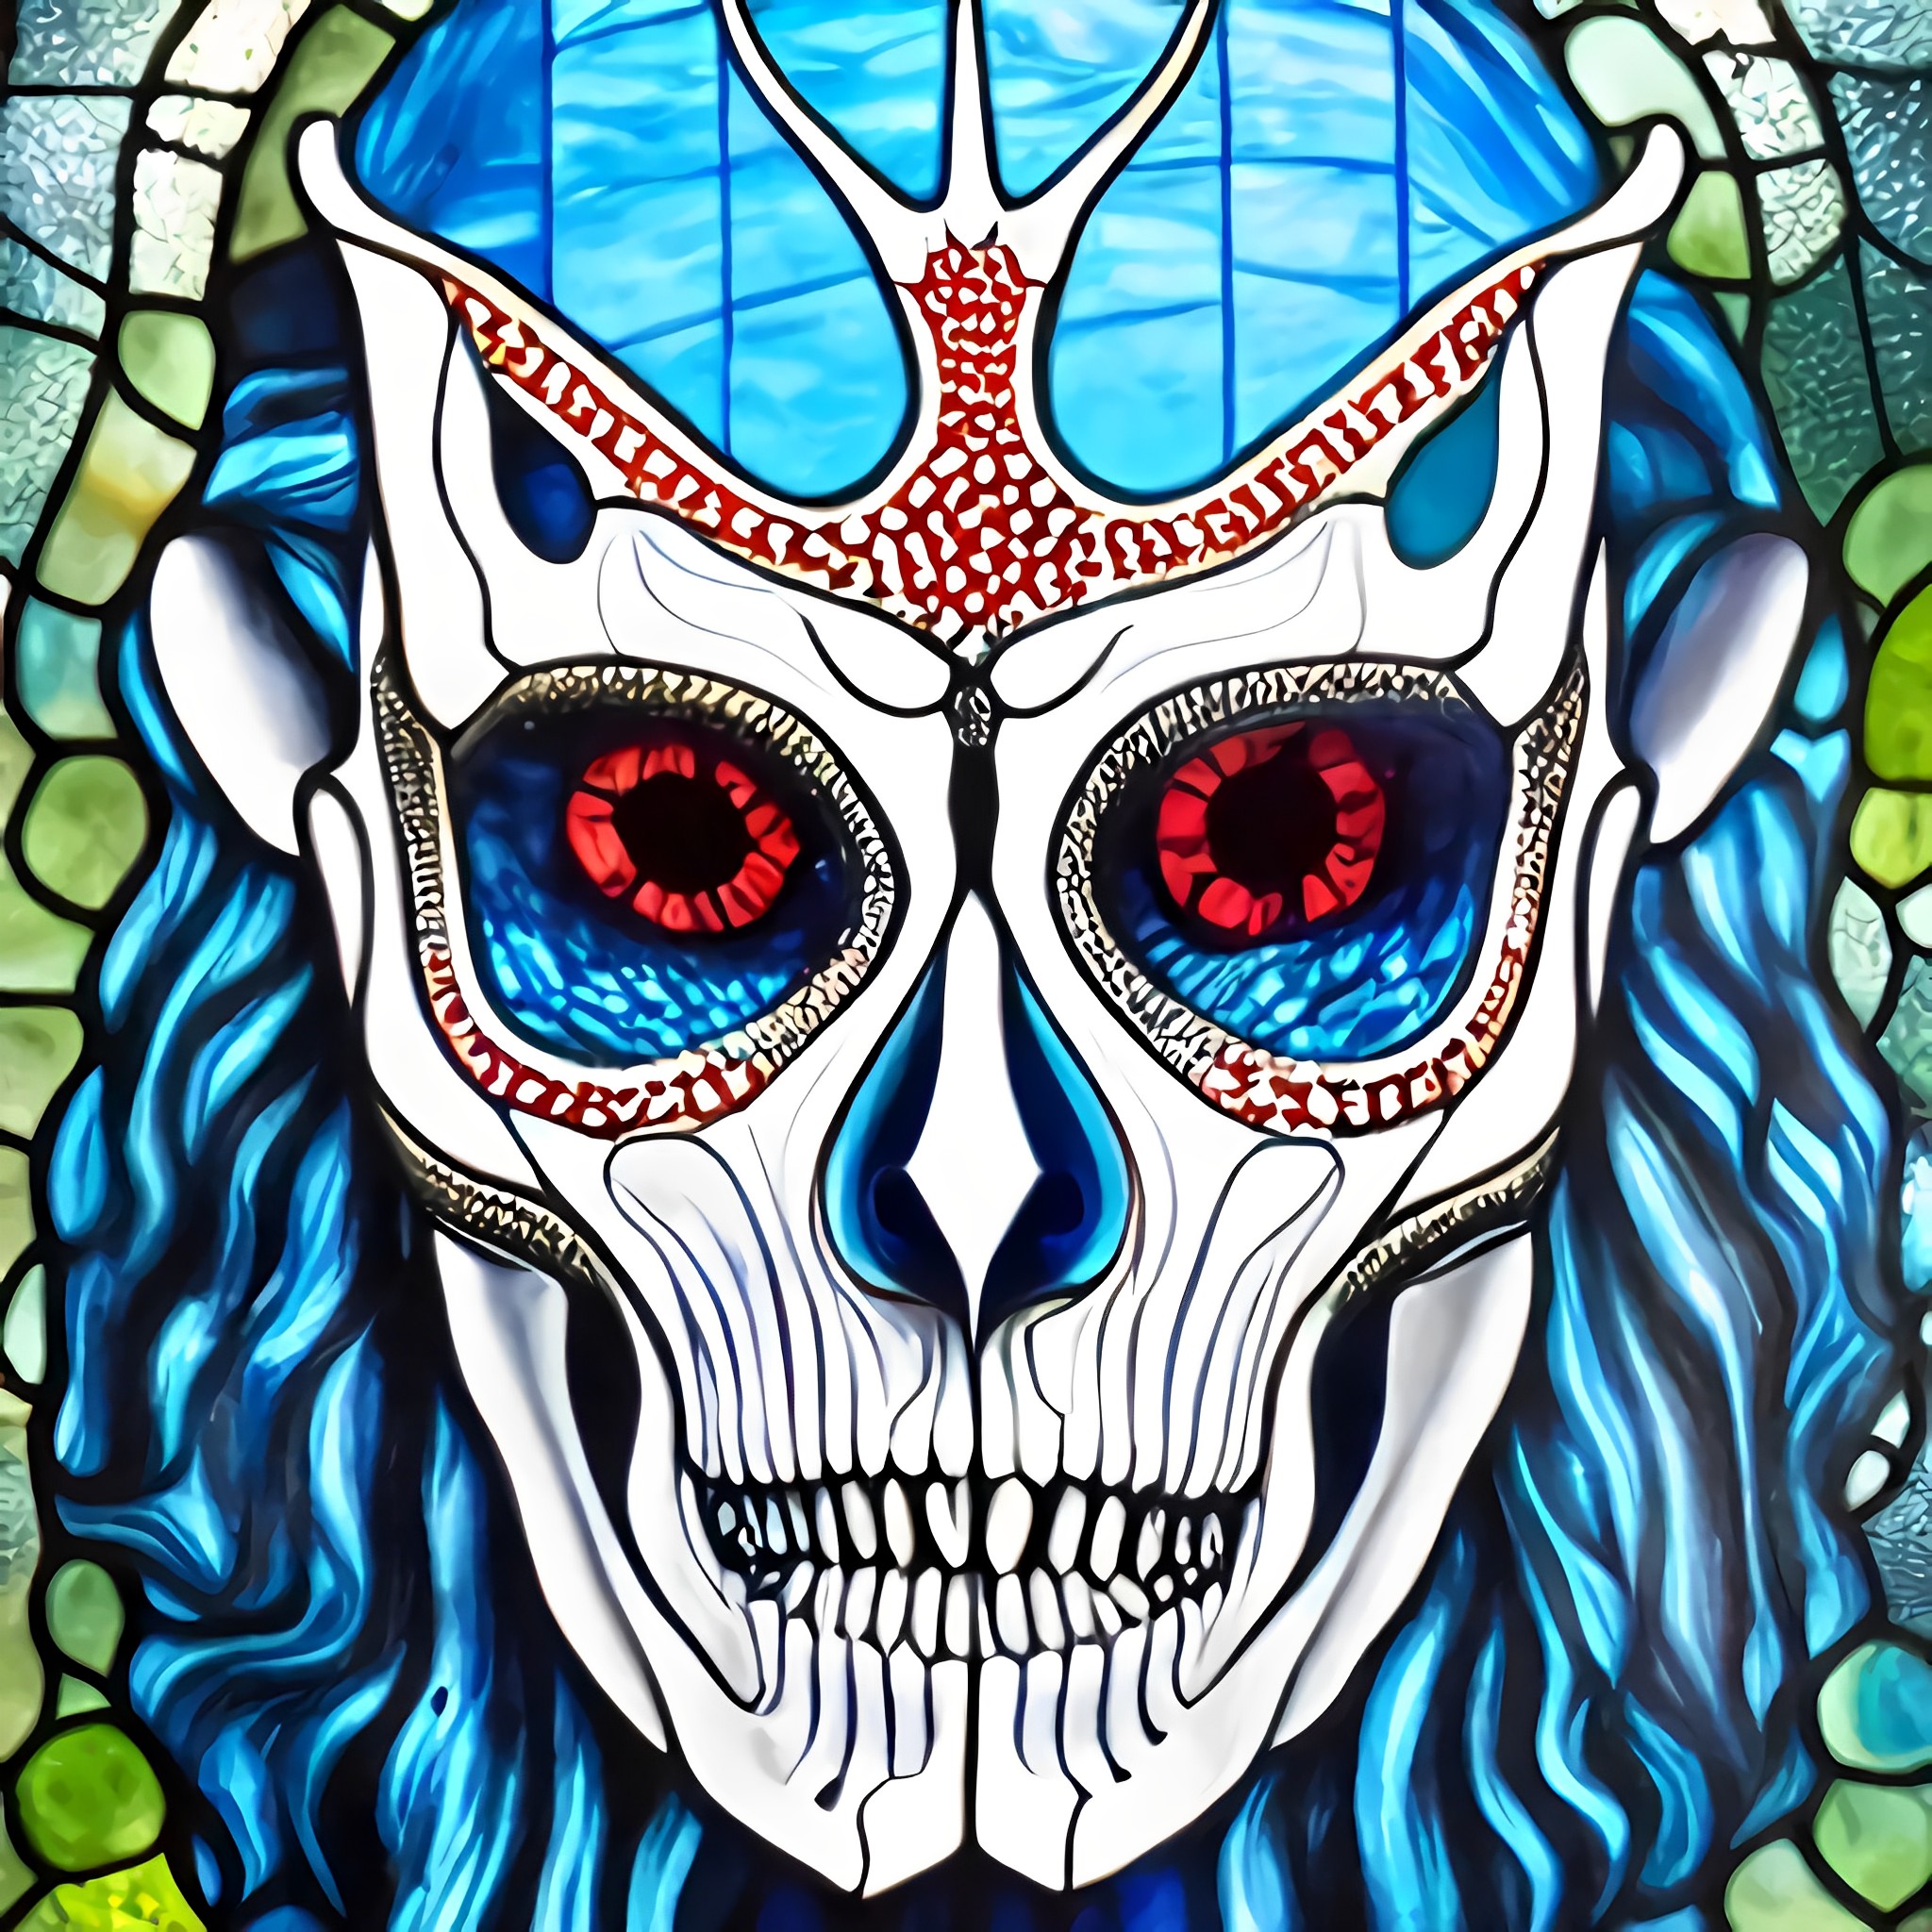 Corrupt stained glass #3